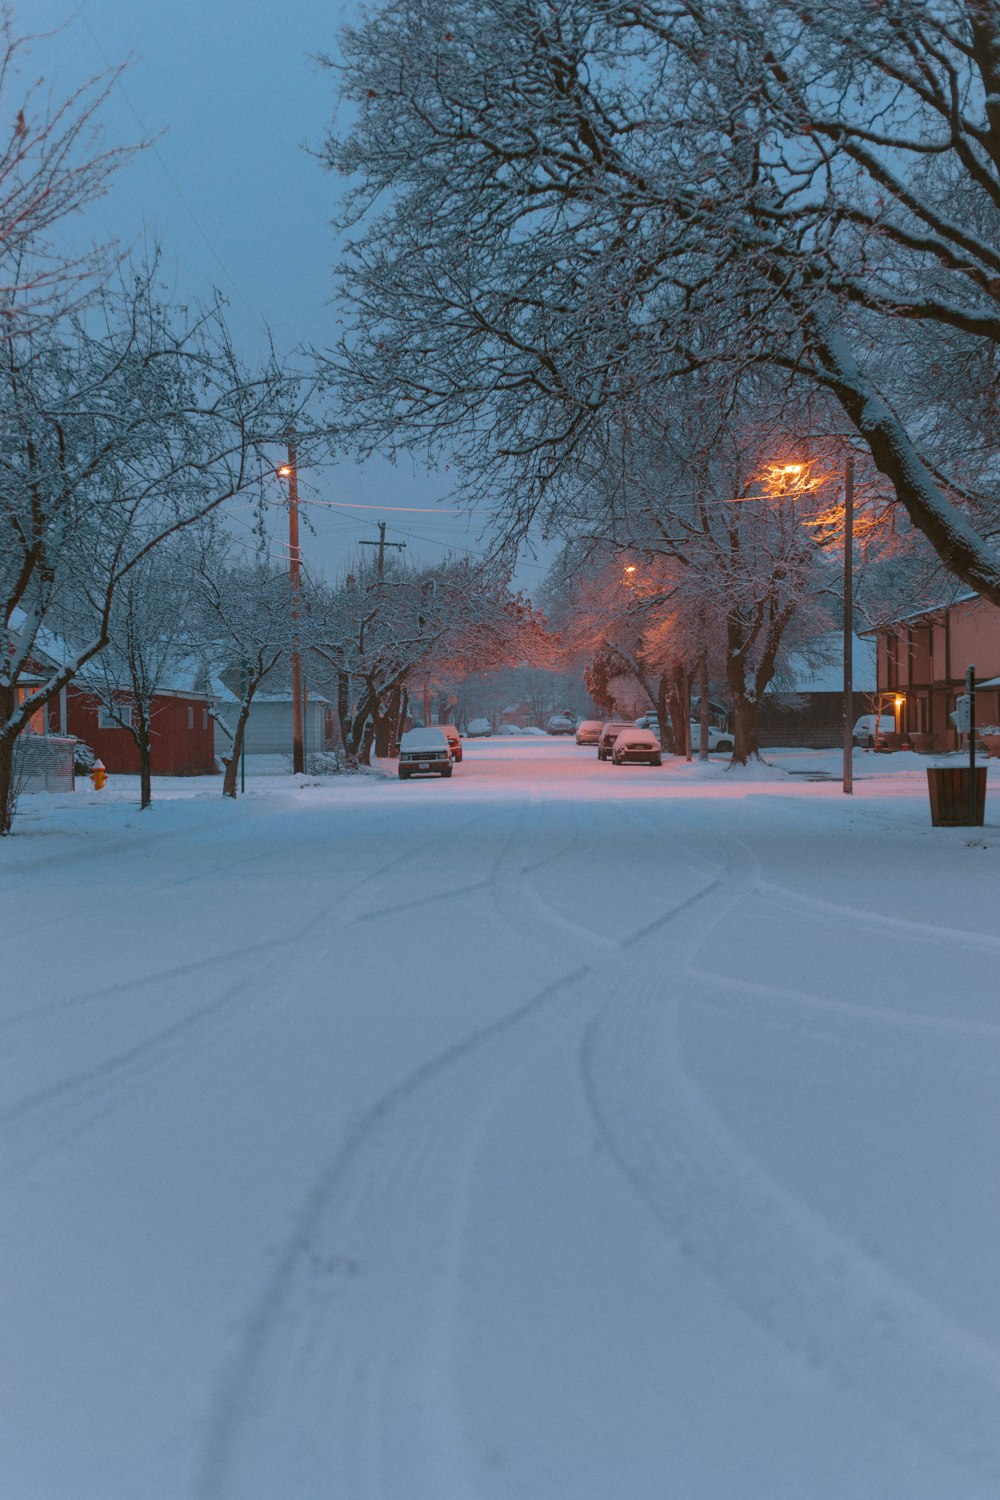 a snow covered street with cars parked on the side of it